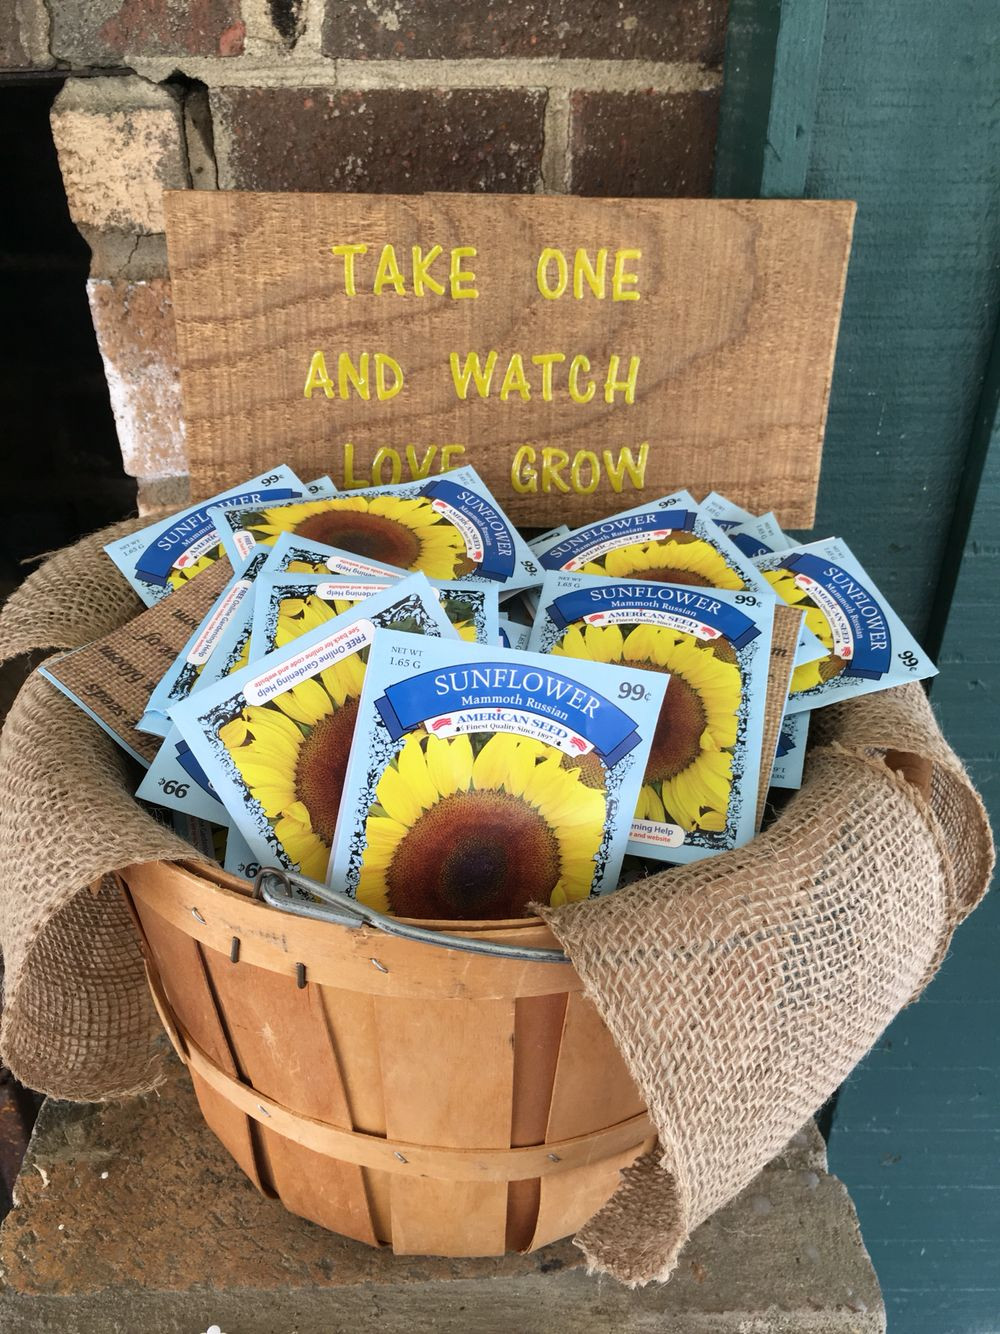 Thank You Gift Ideas For Couples
 "Take one and watch love grow" sunflower seeds as a thank